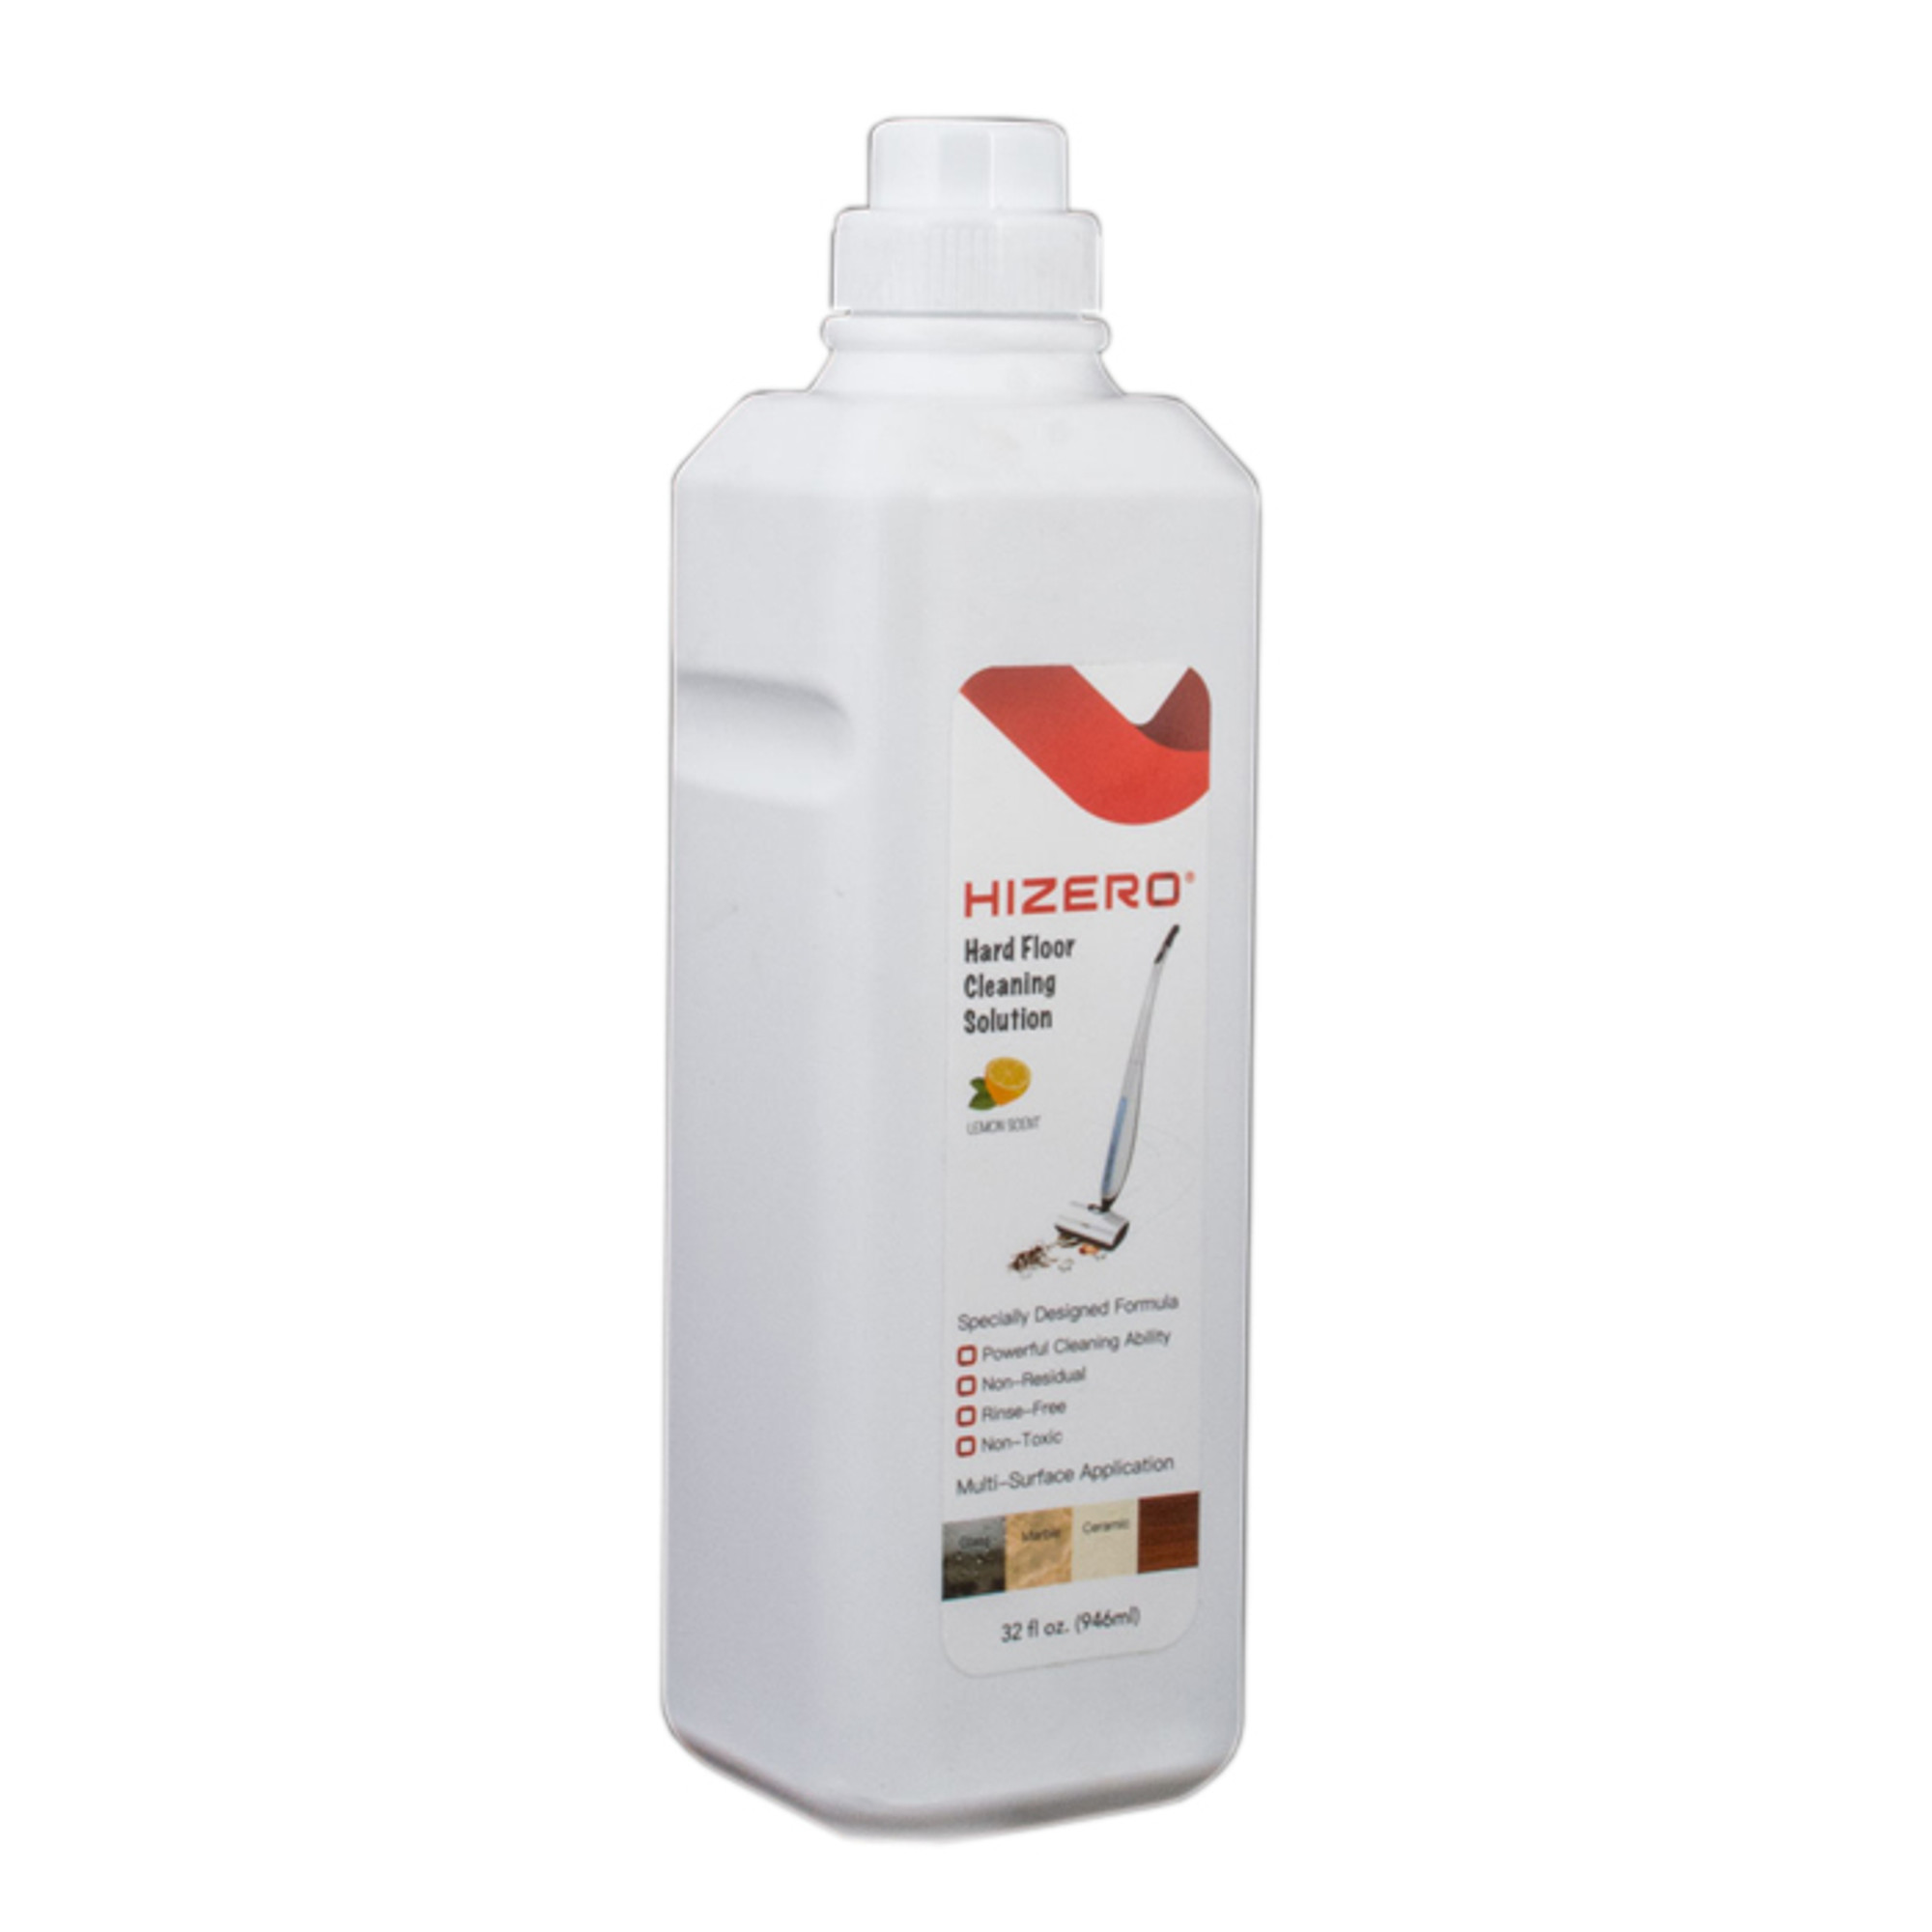 Buy Hizero Floor Cleaning Detergent From Canada At Mchardyvac Com